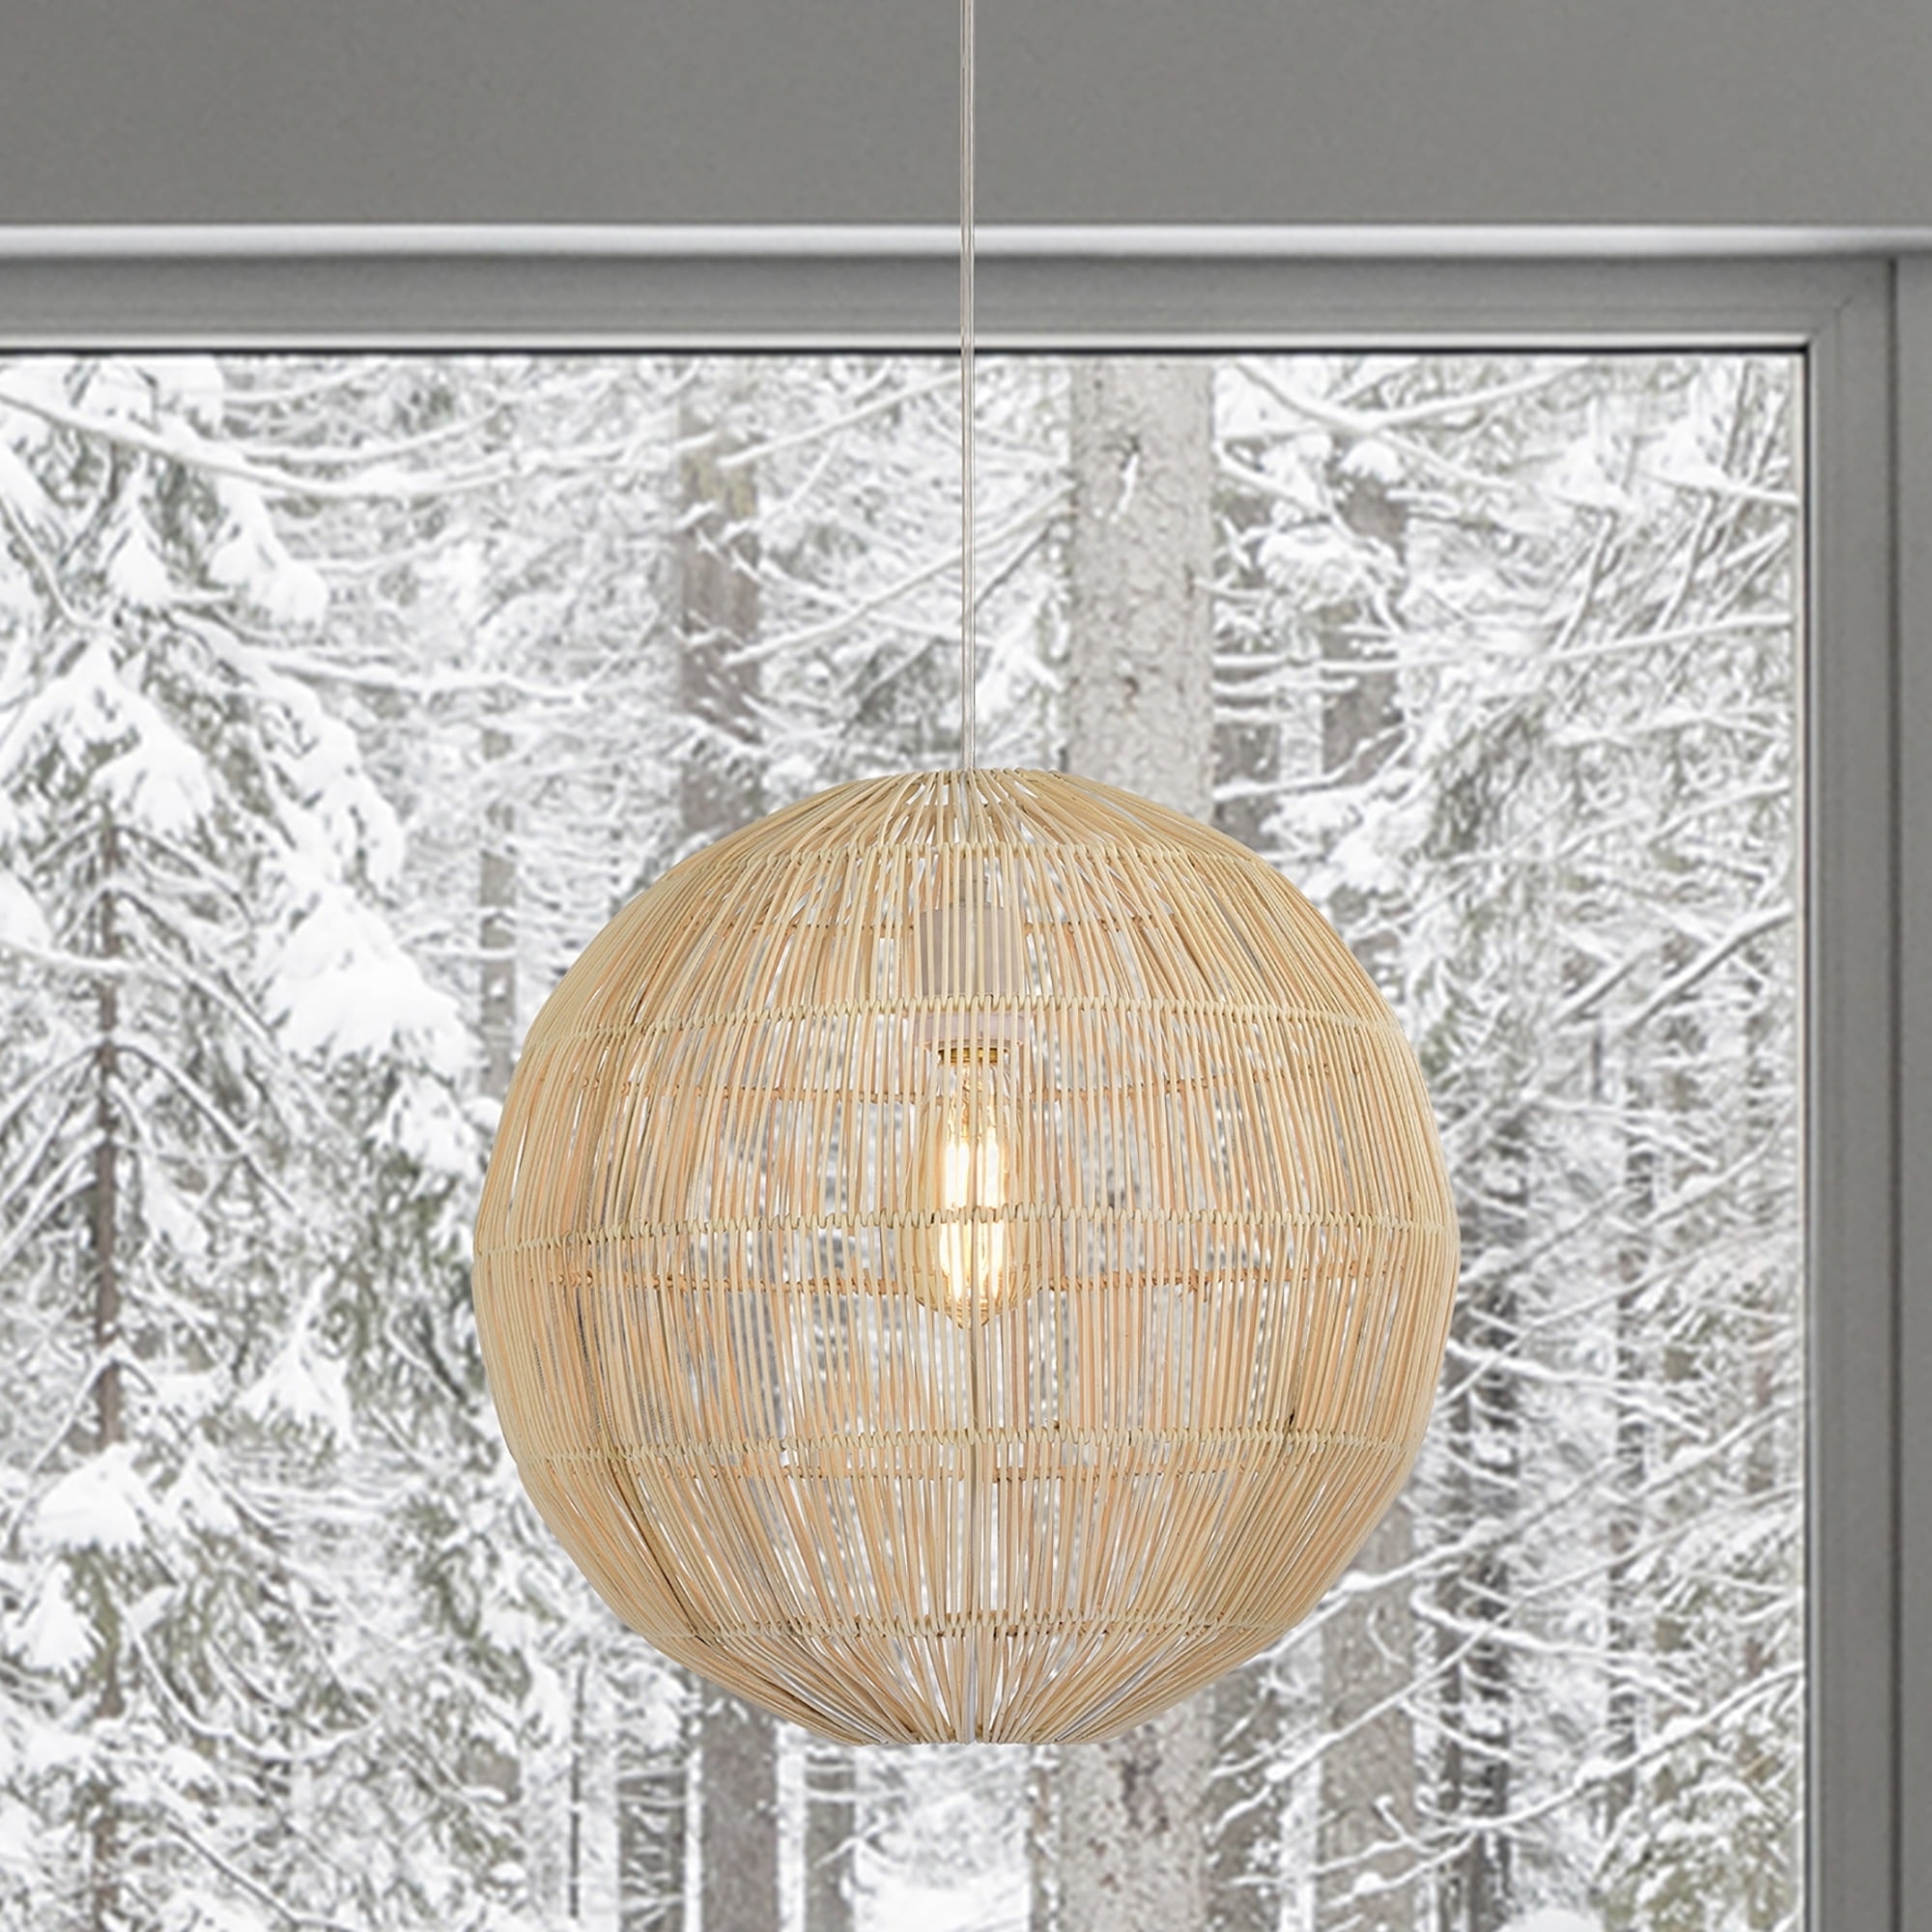 the globe pendant lamp in front of a snowy forest